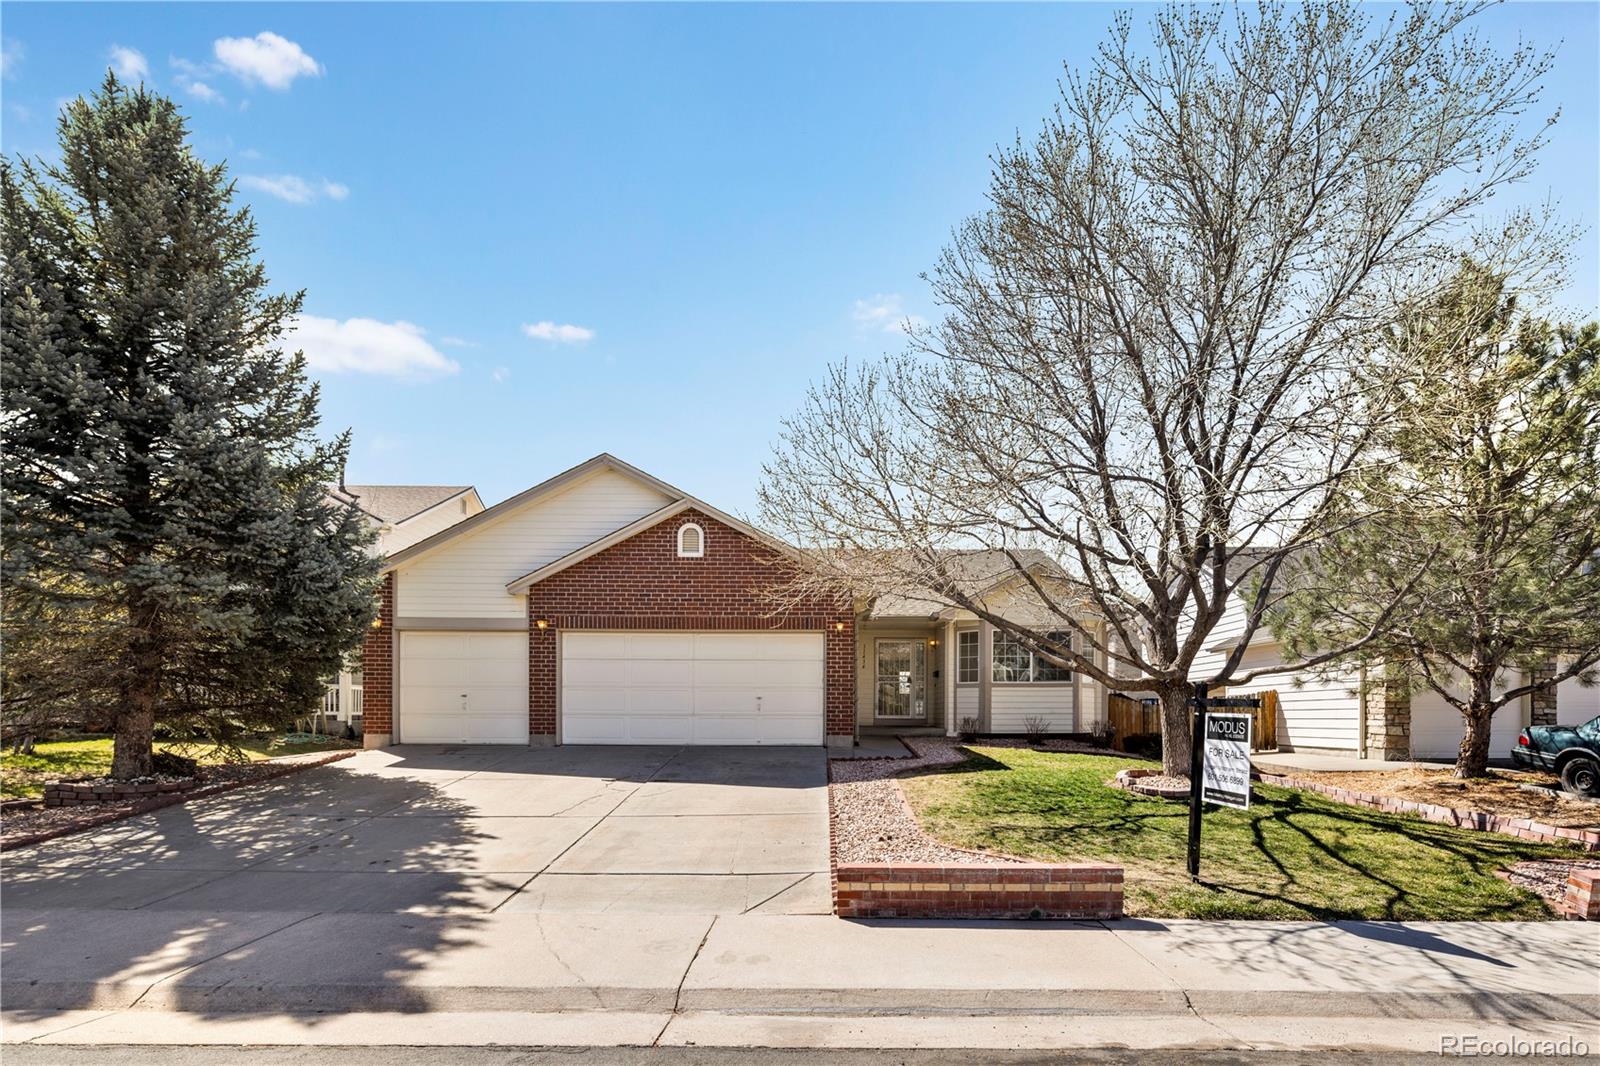 11434  river run circle, commerce city sold home. Closed on 2024-05-17 for $533,000.